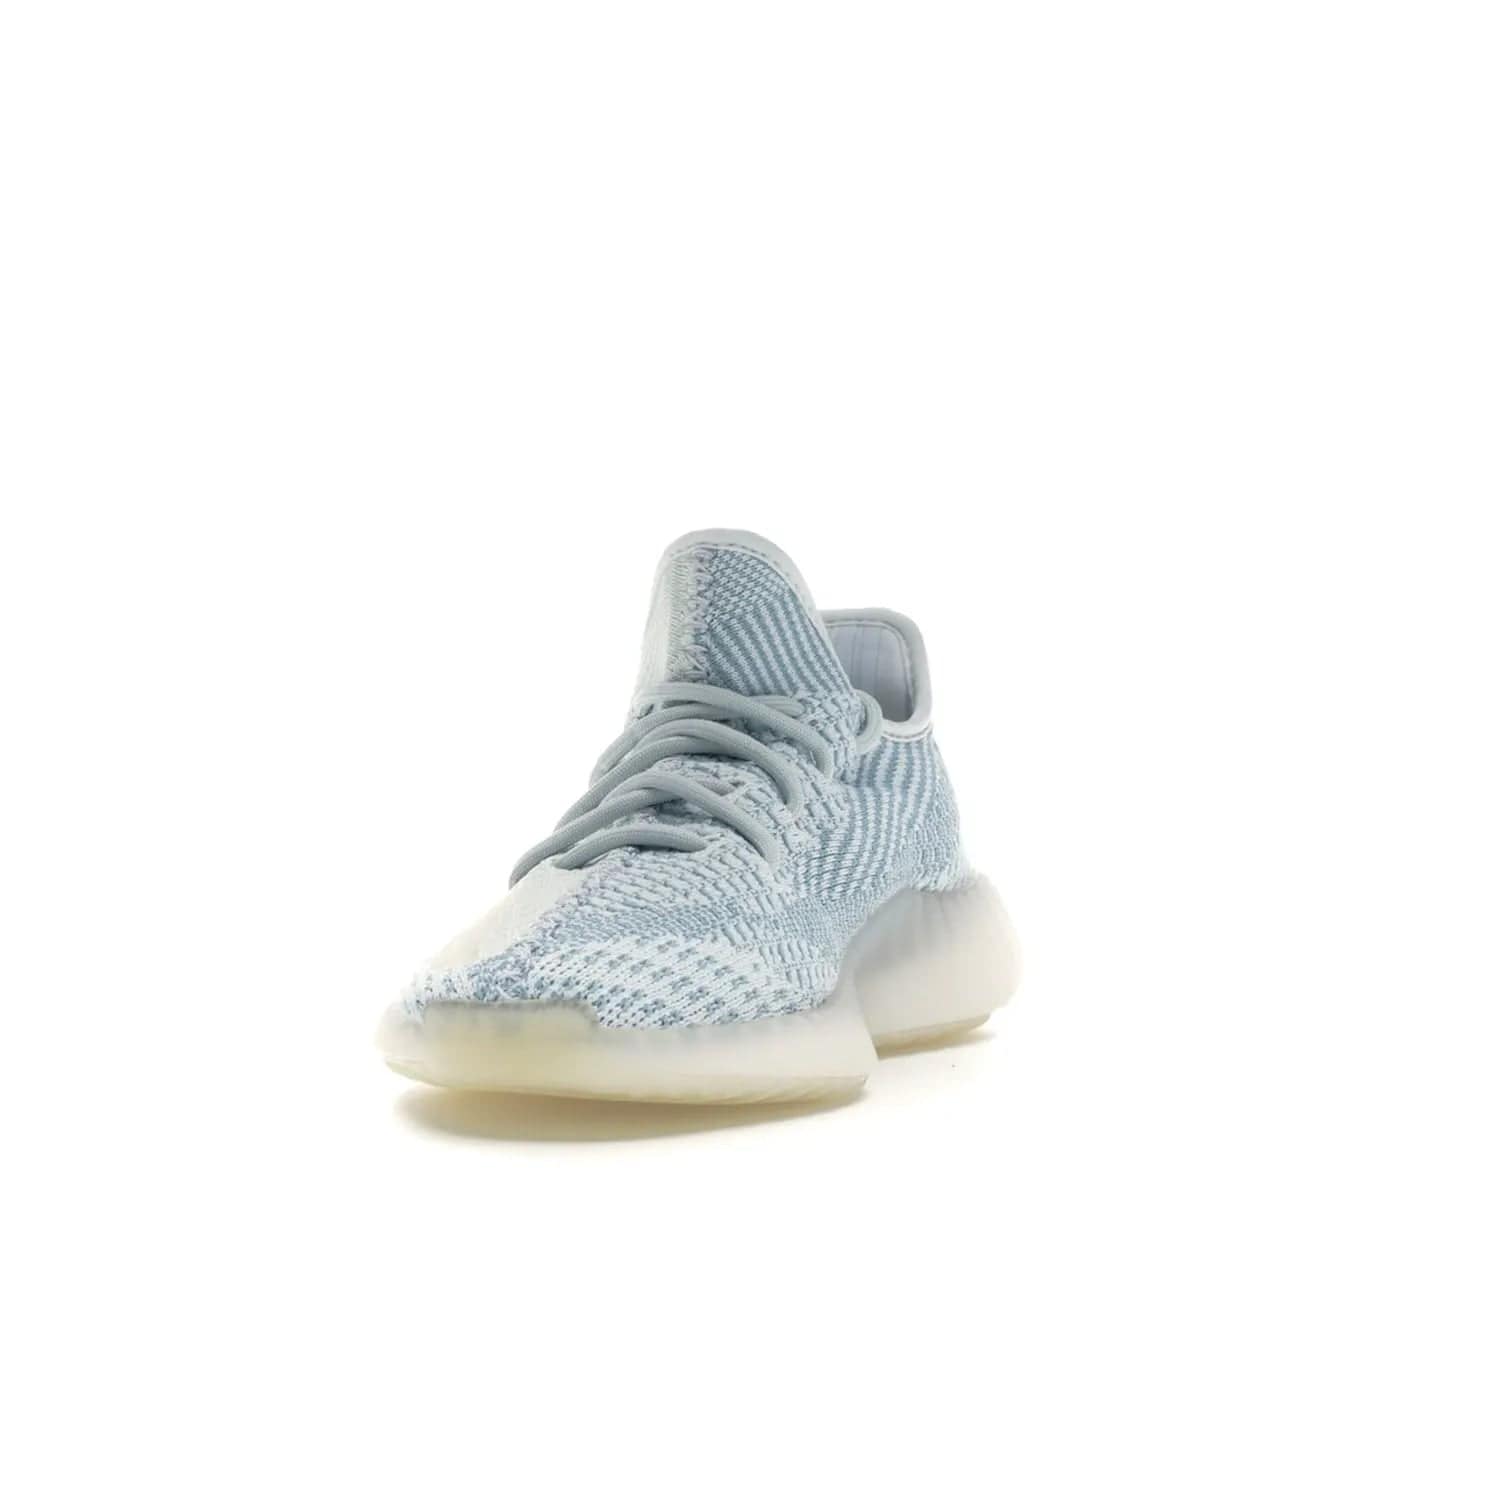 adidas Yeezy Boost 350 V2 Cloud White (Non-Reflective) - Image 12 - Only at www.BallersClubKickz.com - Adidas Yeezy Boost 350 V2 Cloud White (Non-Reflective) features Primeknit fabric and a unique, eye-catching design of cream, bluish-white, and transparent strip. Step out in timeless style with this eye-catching sneaker.